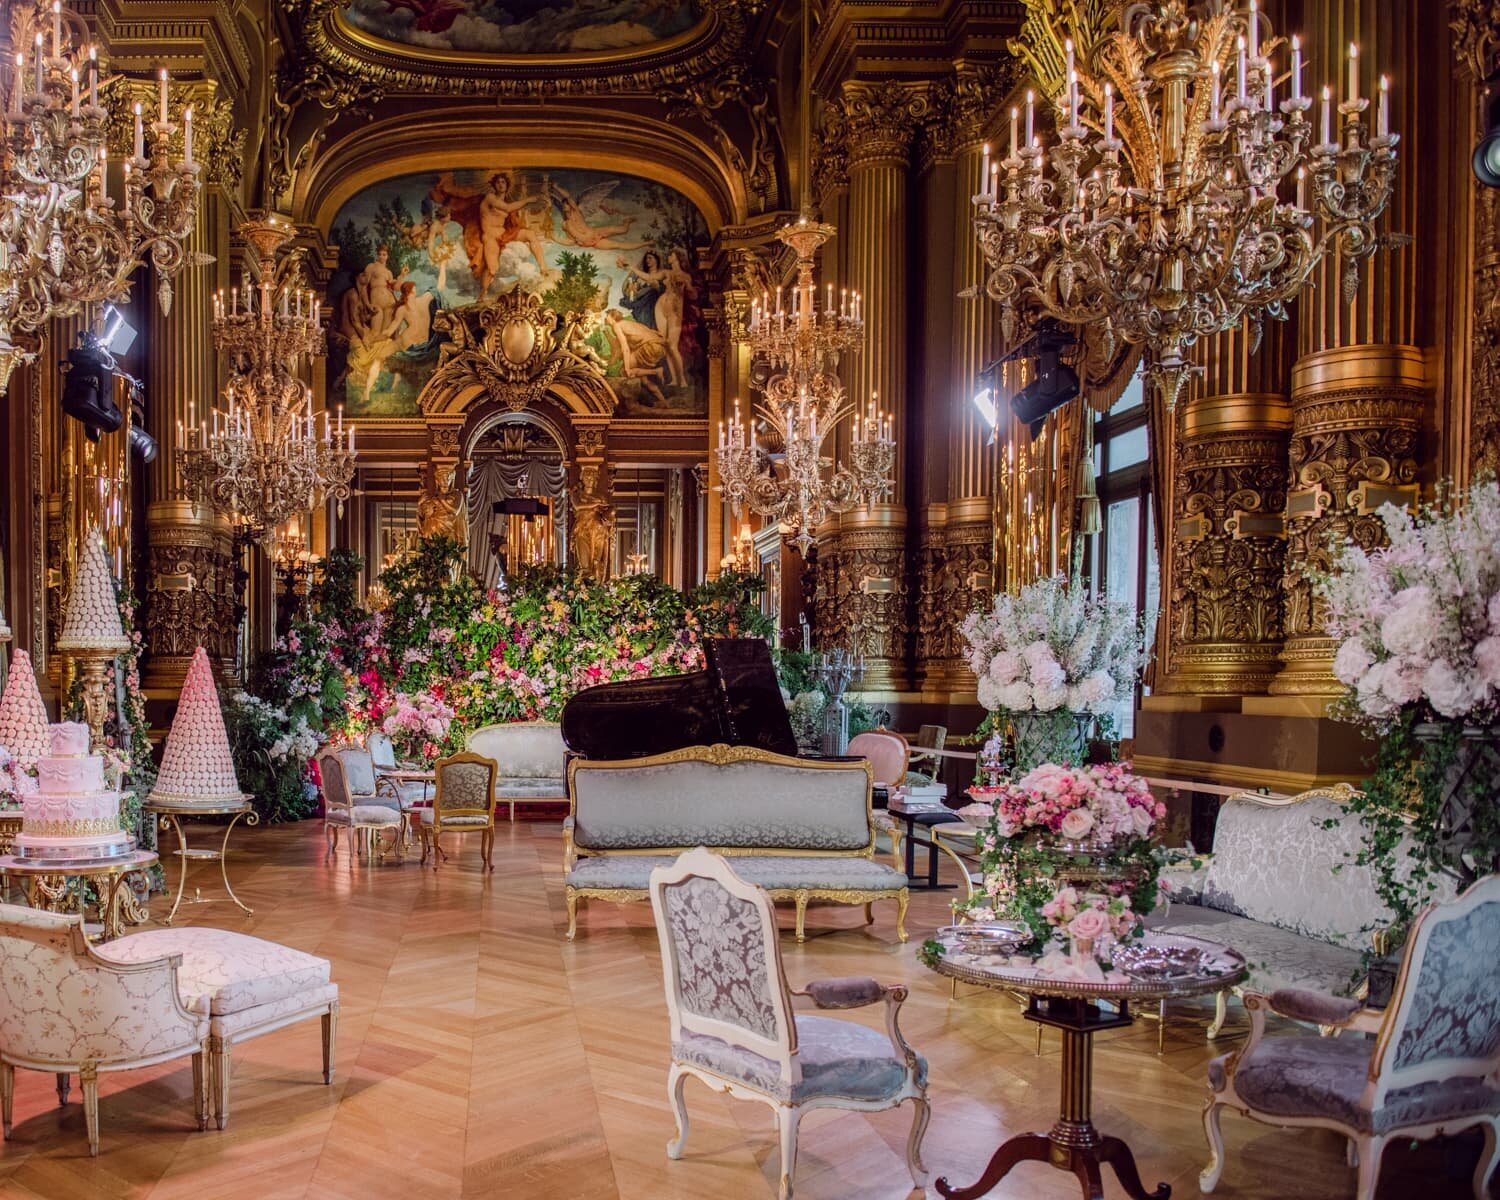 Room in the Palais Garnier decorated with flowers for a wedding